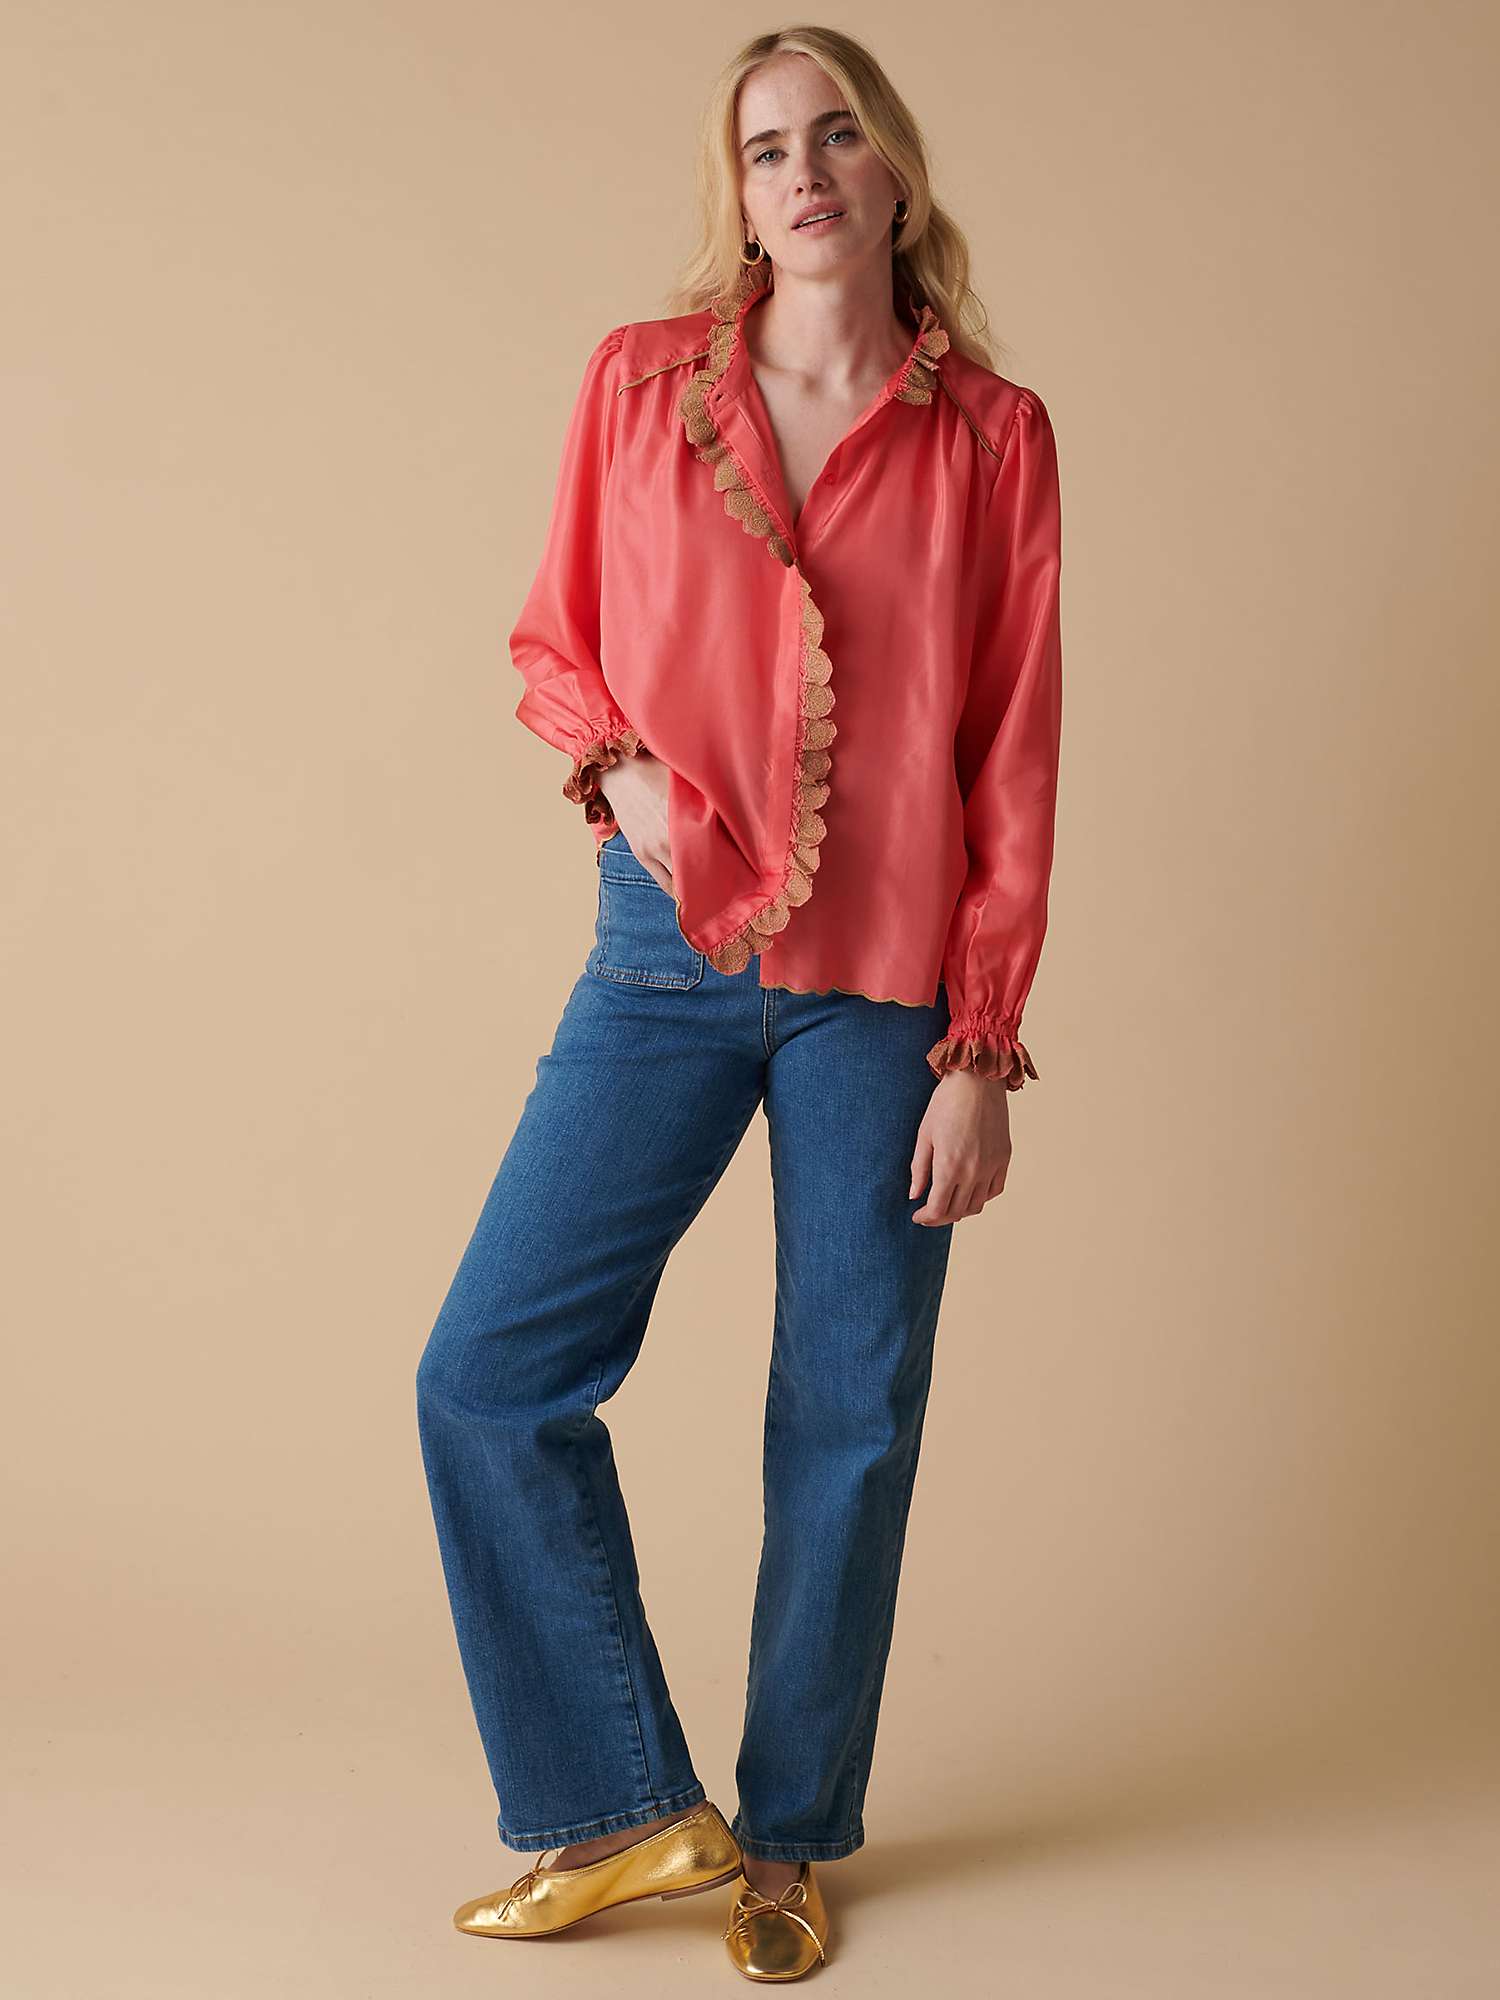 Buy Cape Cove Silk Embroidered Blouse, Soft Pink Online at johnlewis.com